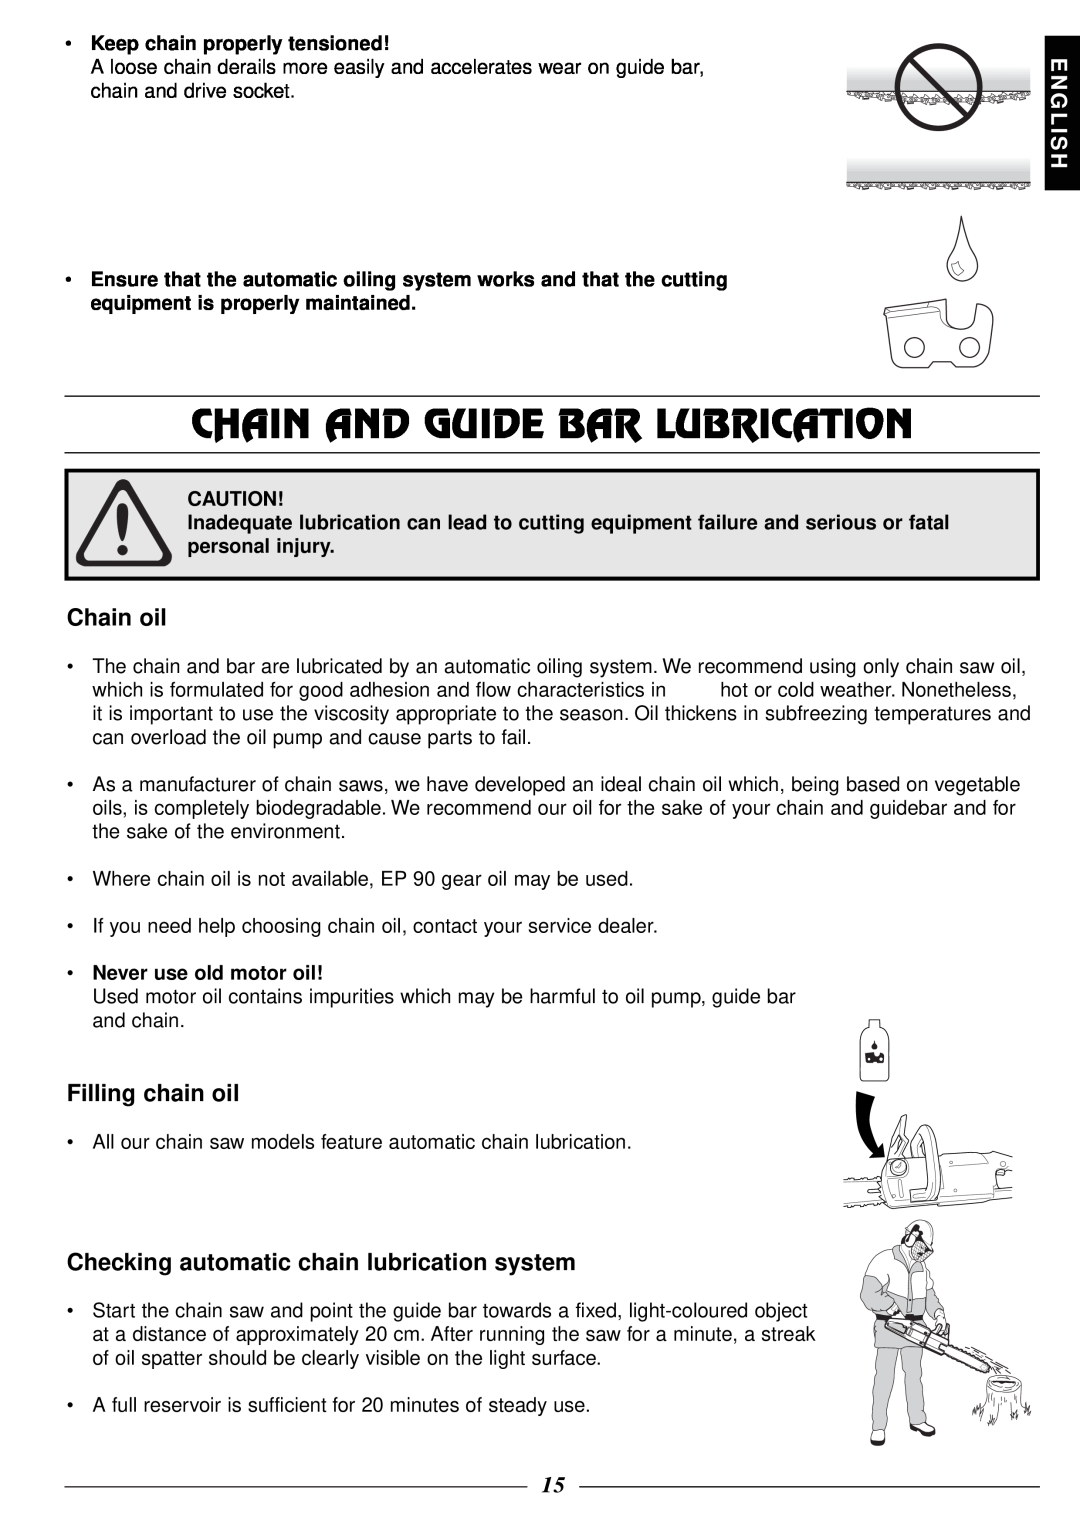 Husqvarna 318 Chain And Guide Bar Lubrication, Chain oil, Filling chain oil, Checking automatic chain lubrication system 